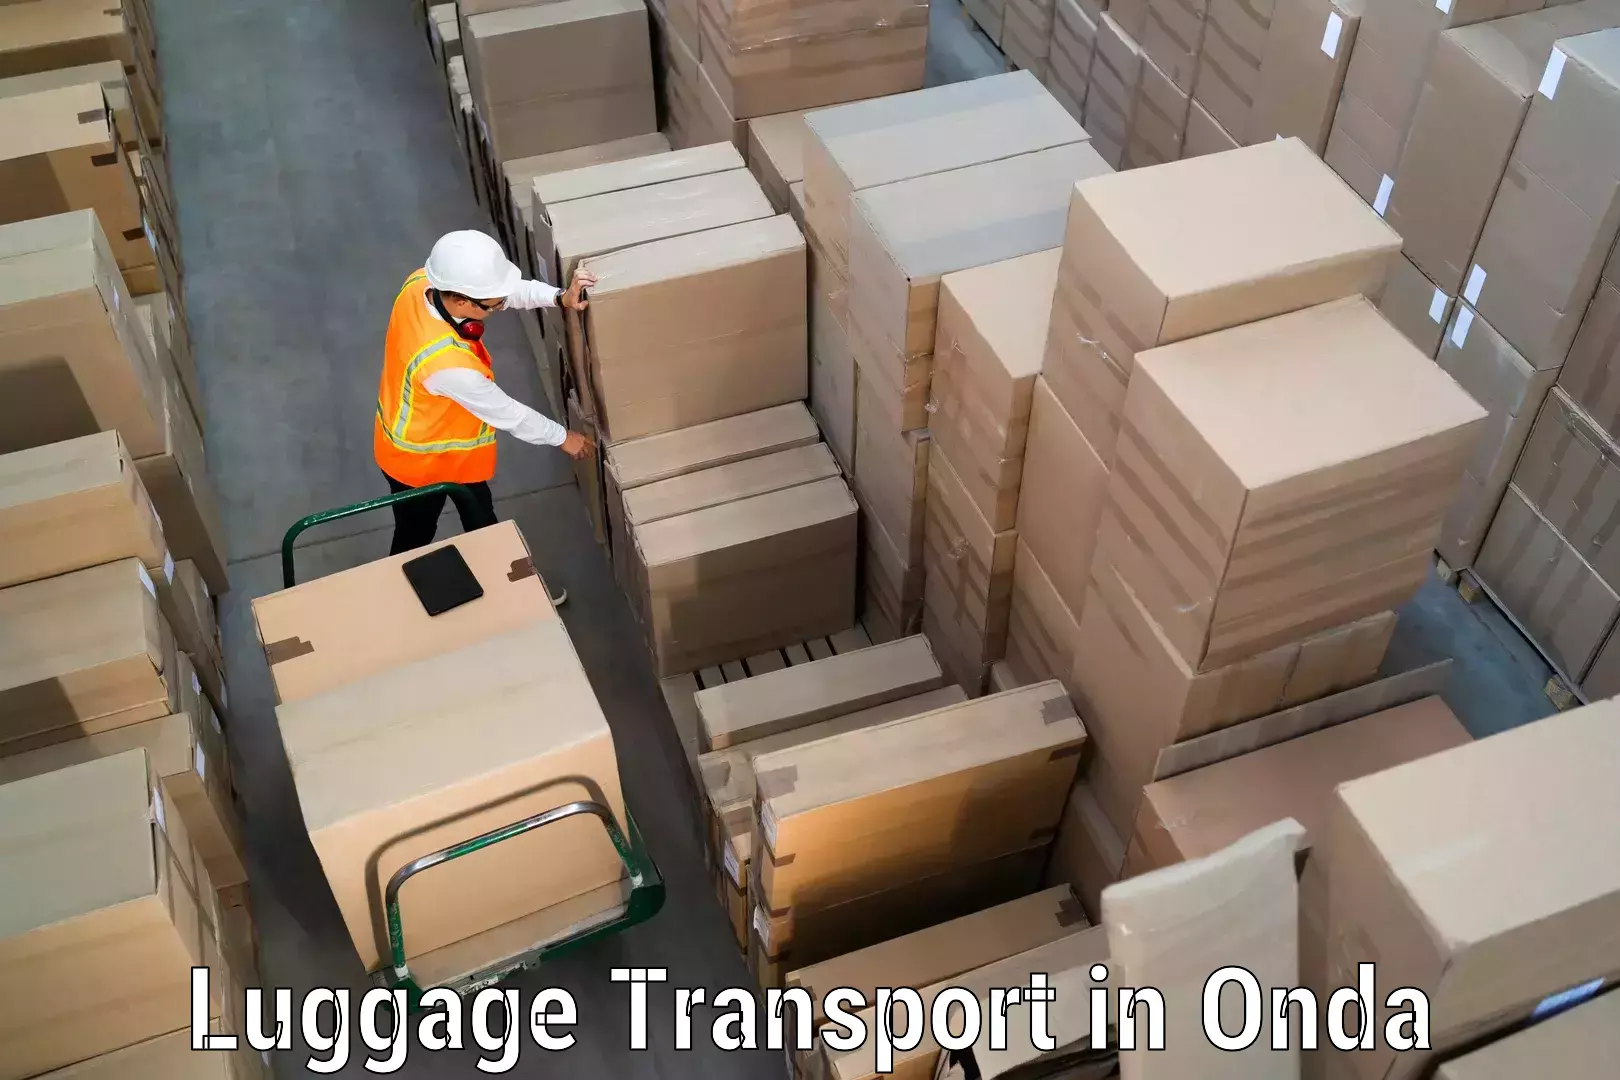 Luggage storage and delivery in Onda